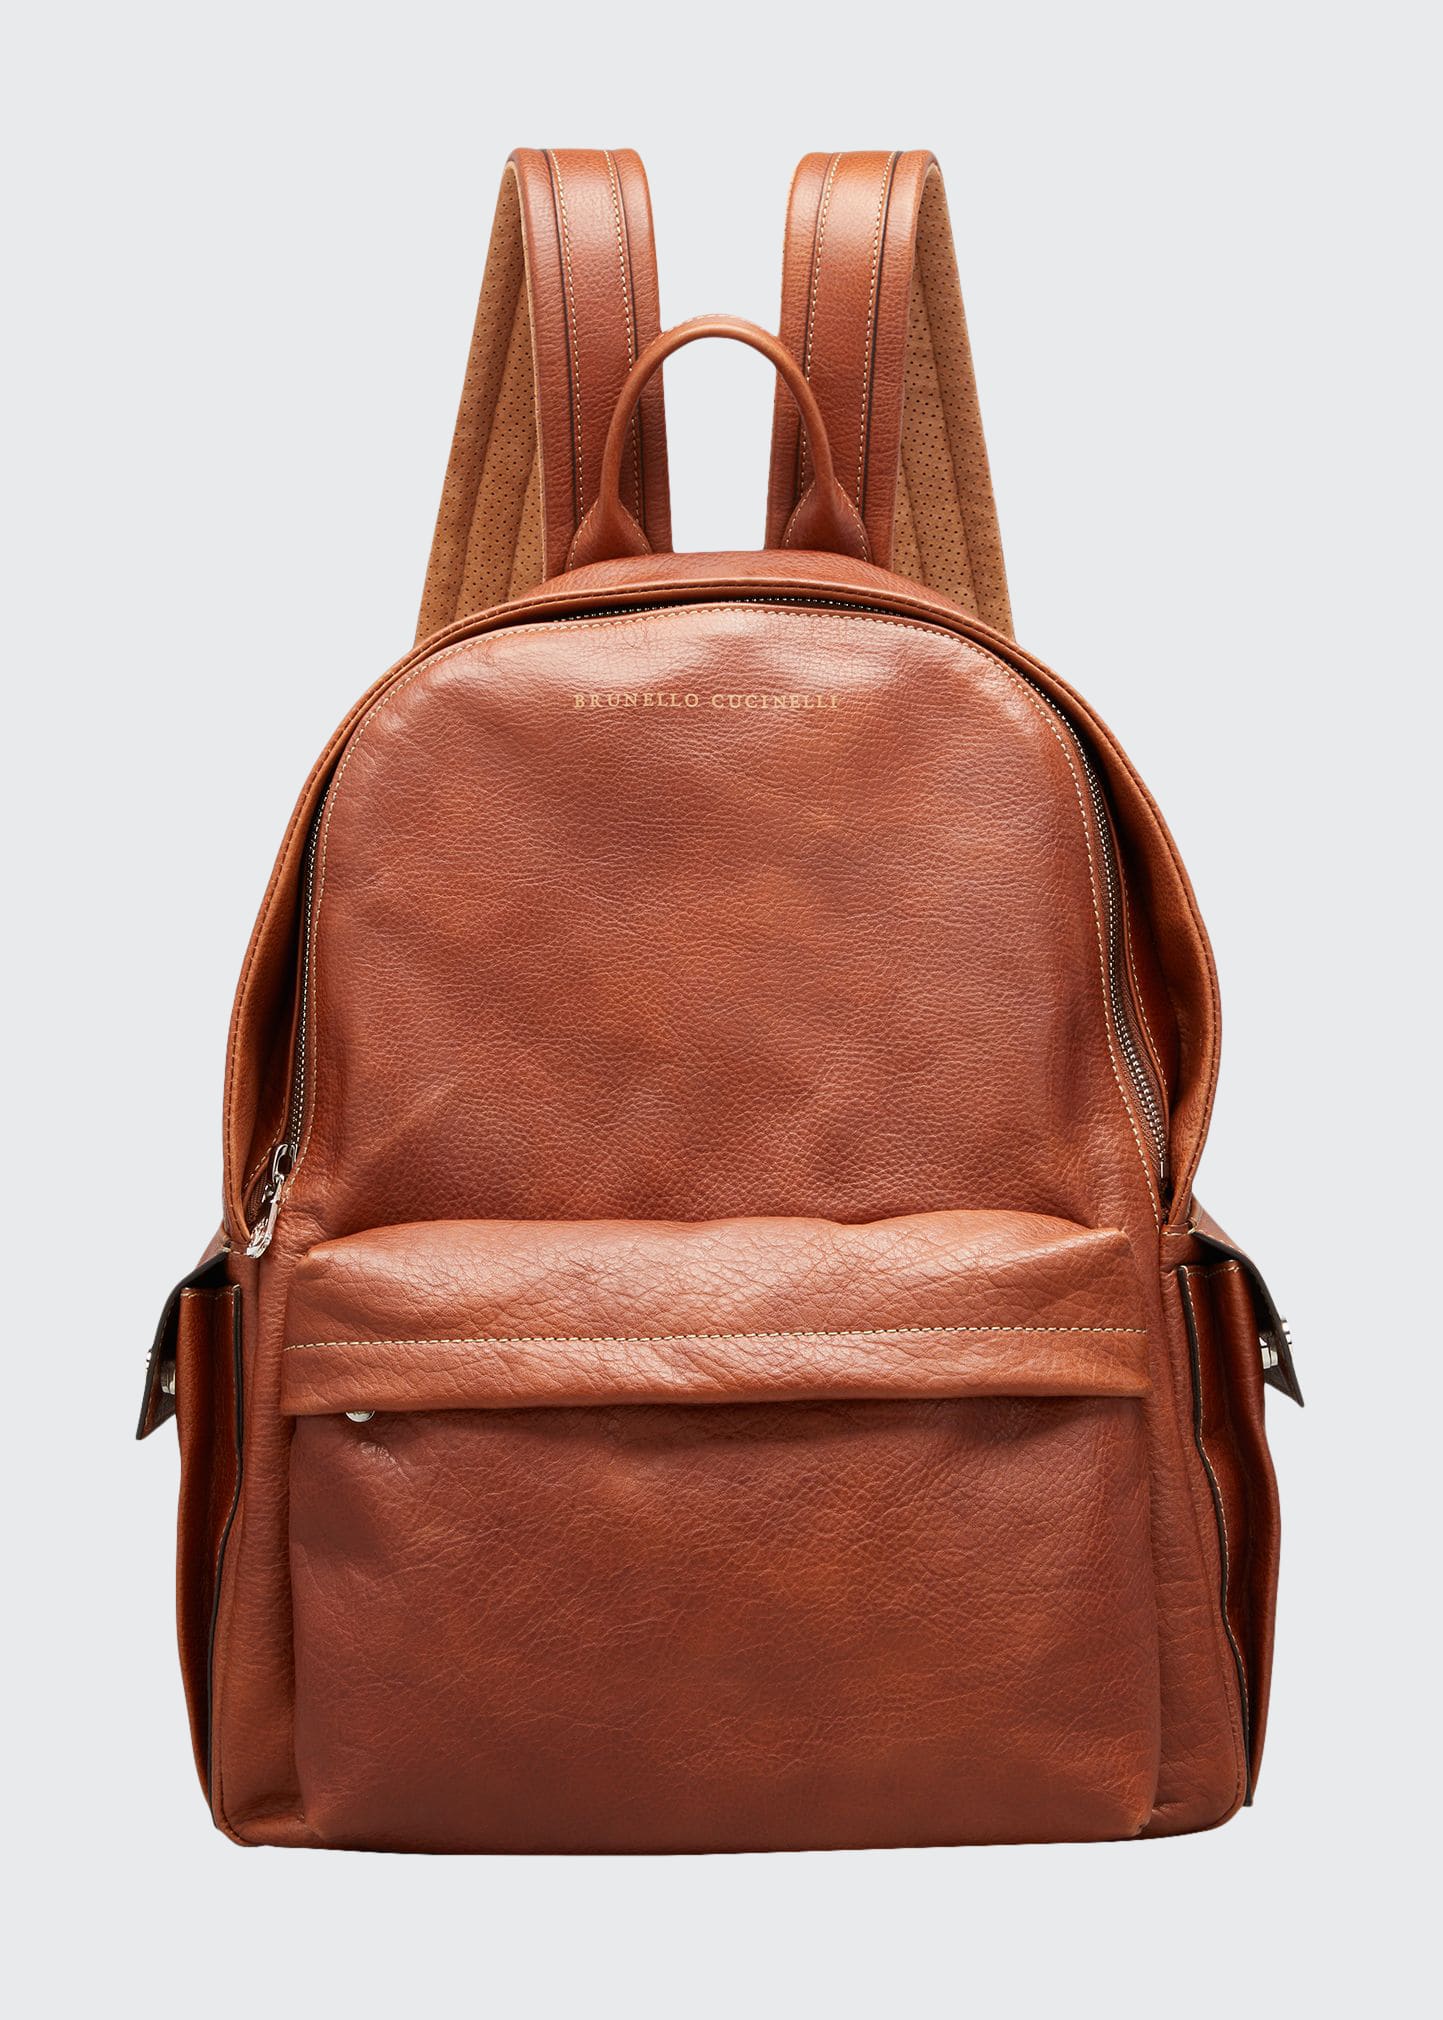 Brunello Cucinelli Men's Grained Leather Backpack In C6608 Copper